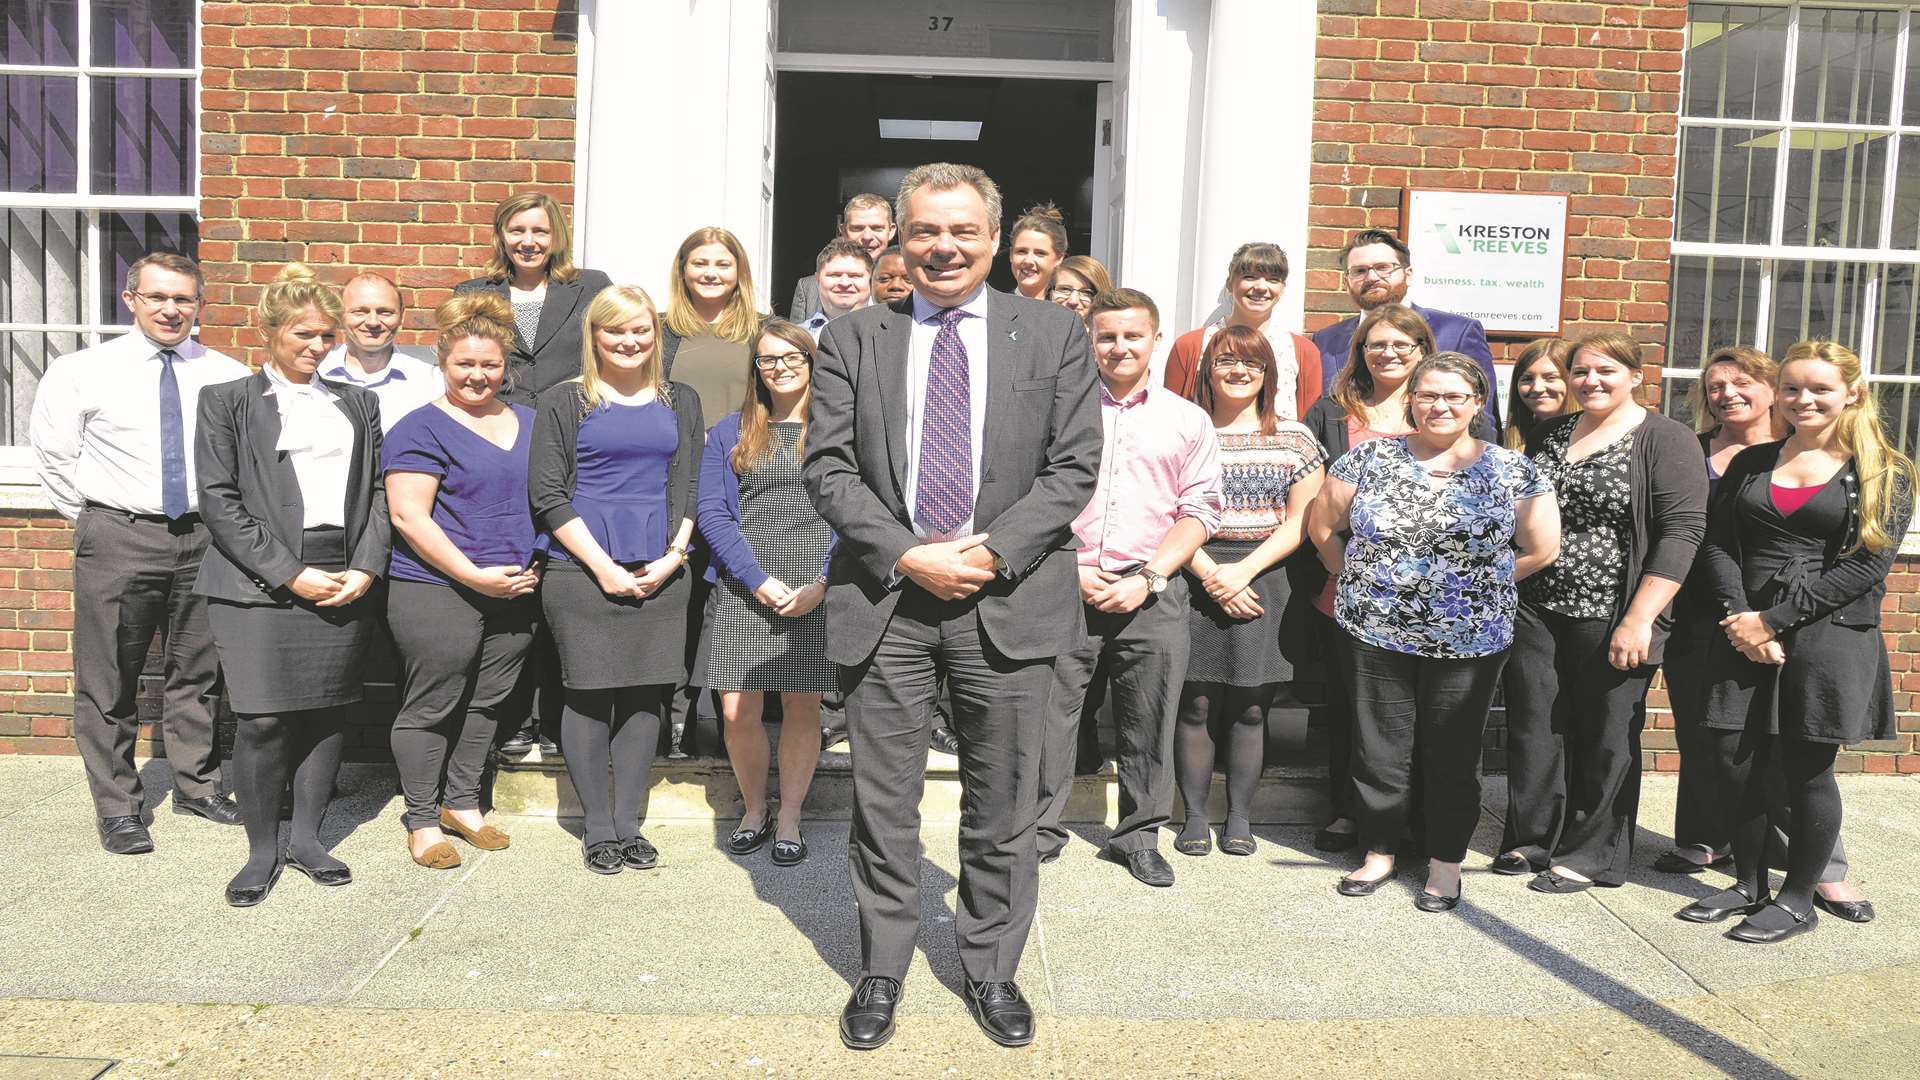 Kreston Reeves senior partner Andrew Griggs with staff outside its Canterbury office